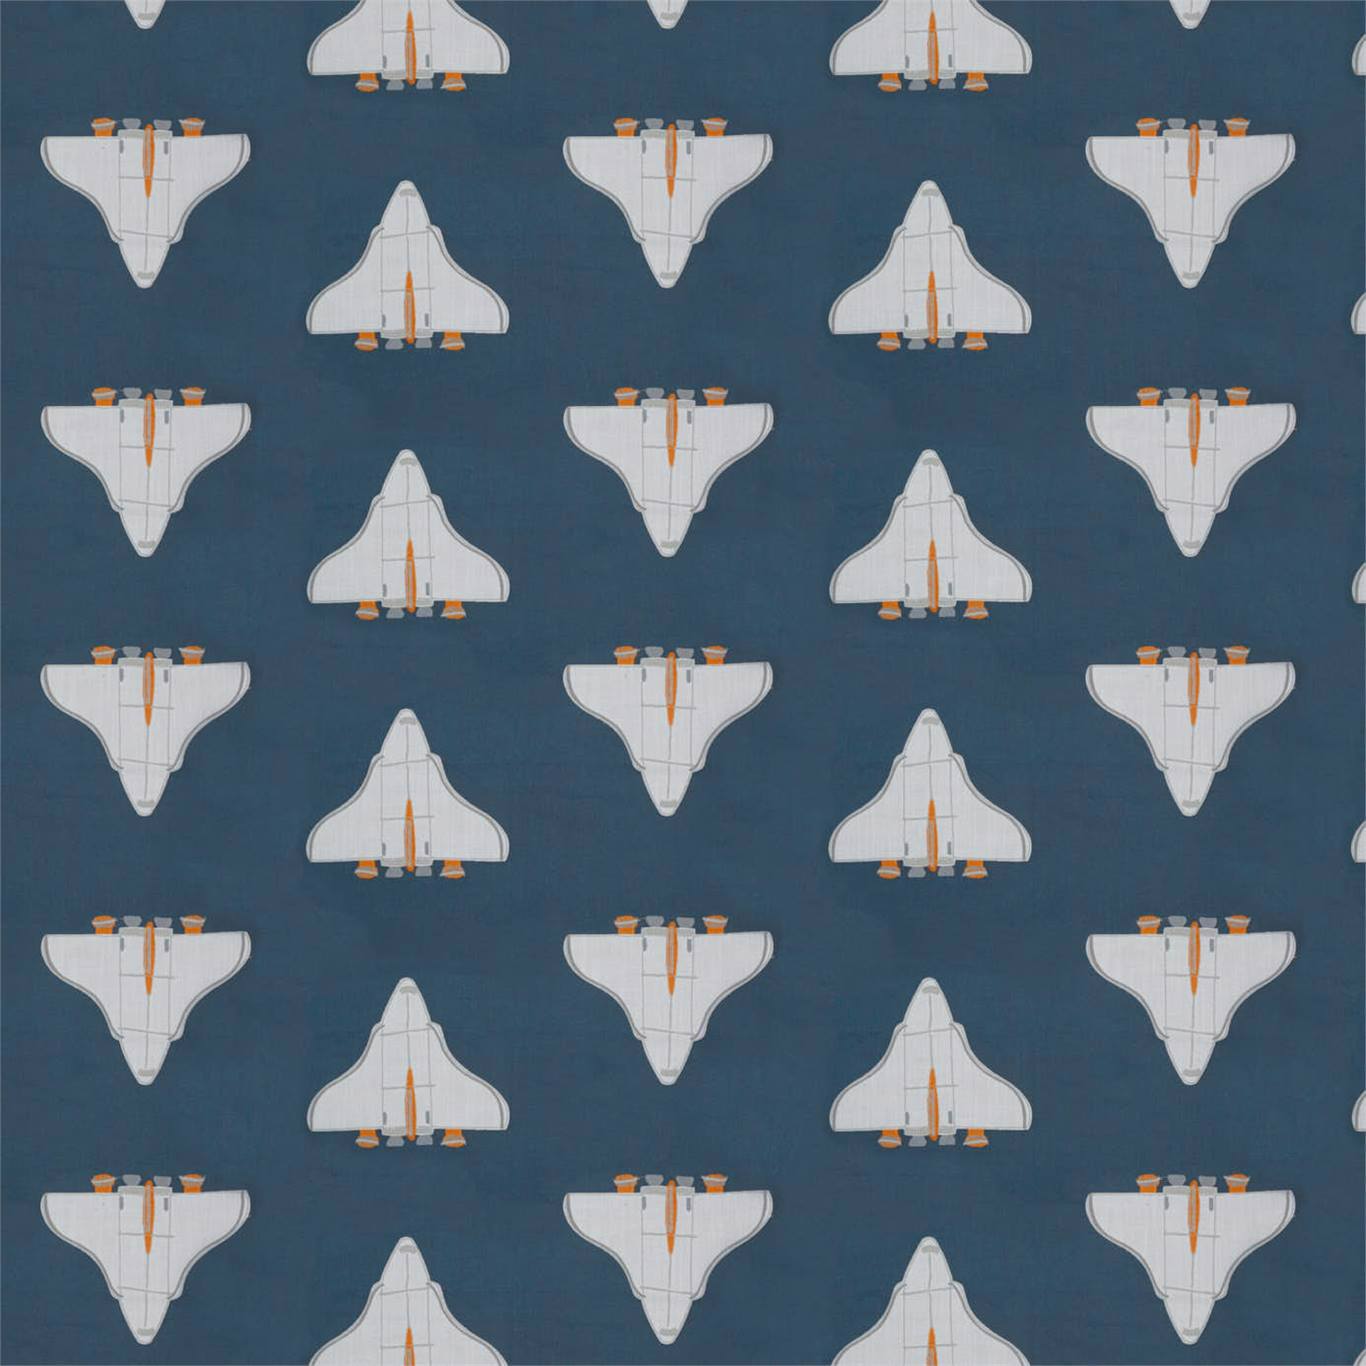 Space Shuttle Apricot/Navy Fabric By Harlequin